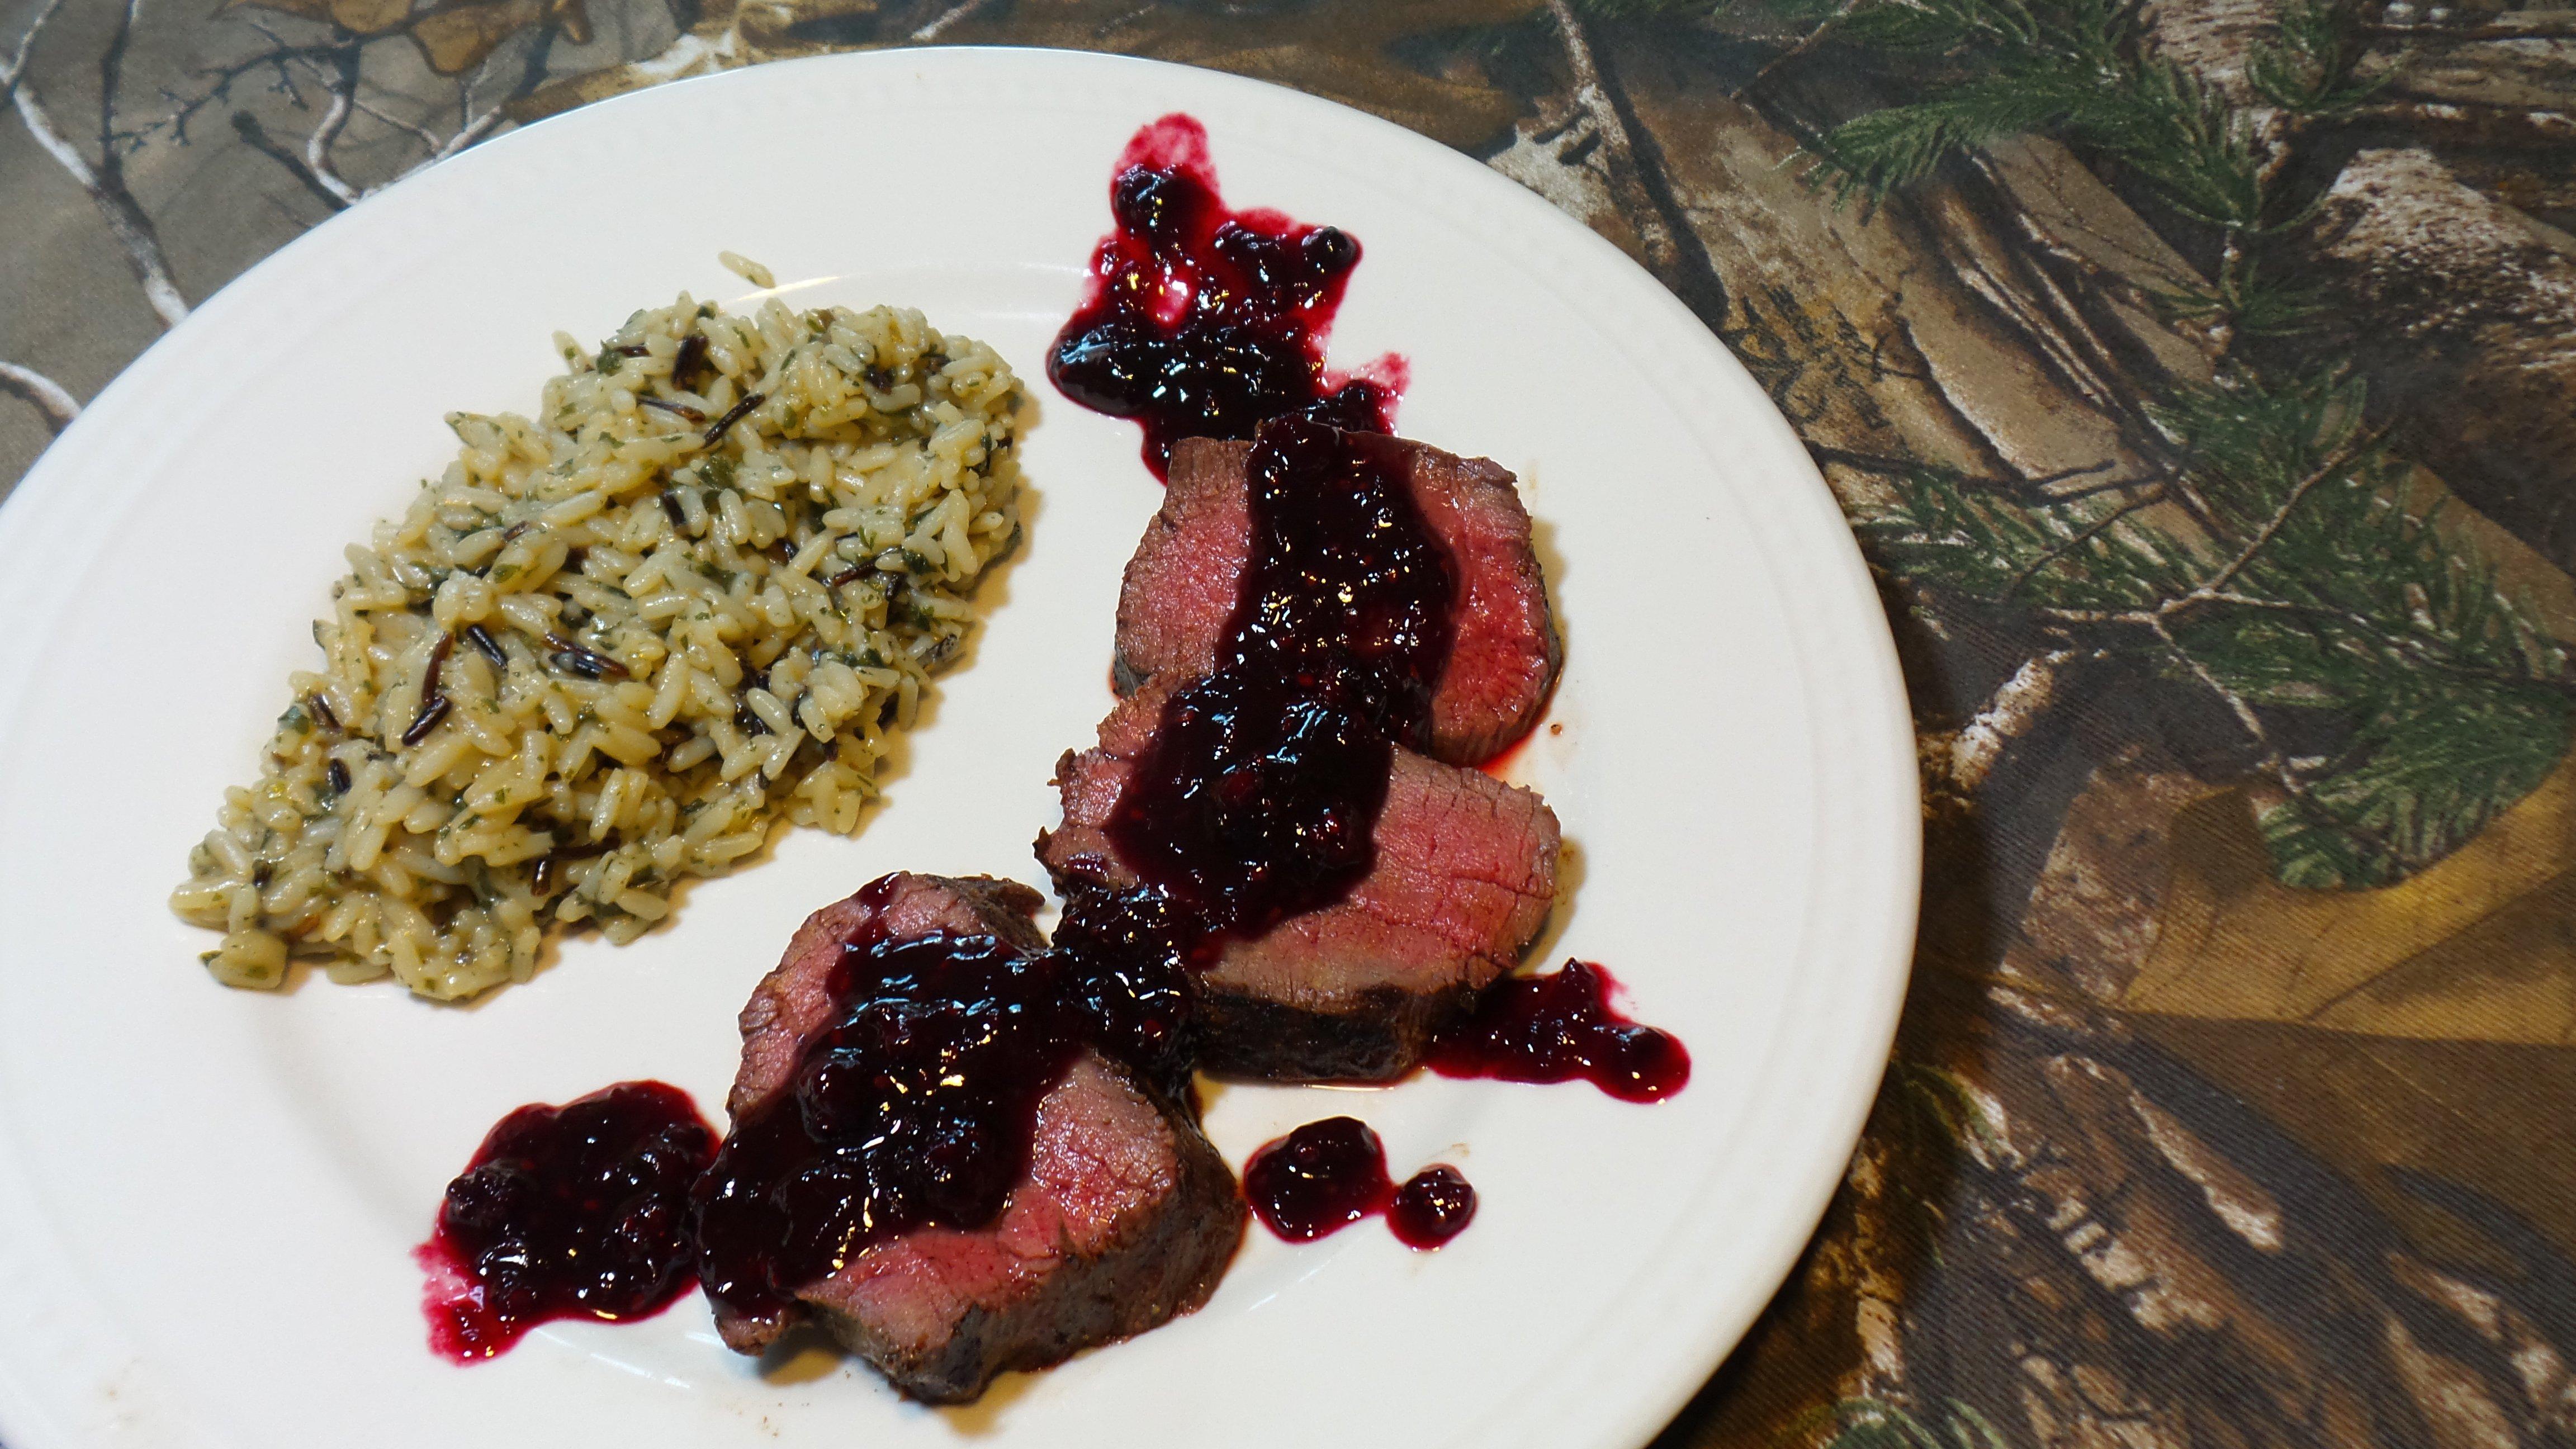 Plate the venison medallions and spoon over the black and blue bourbon sauce.